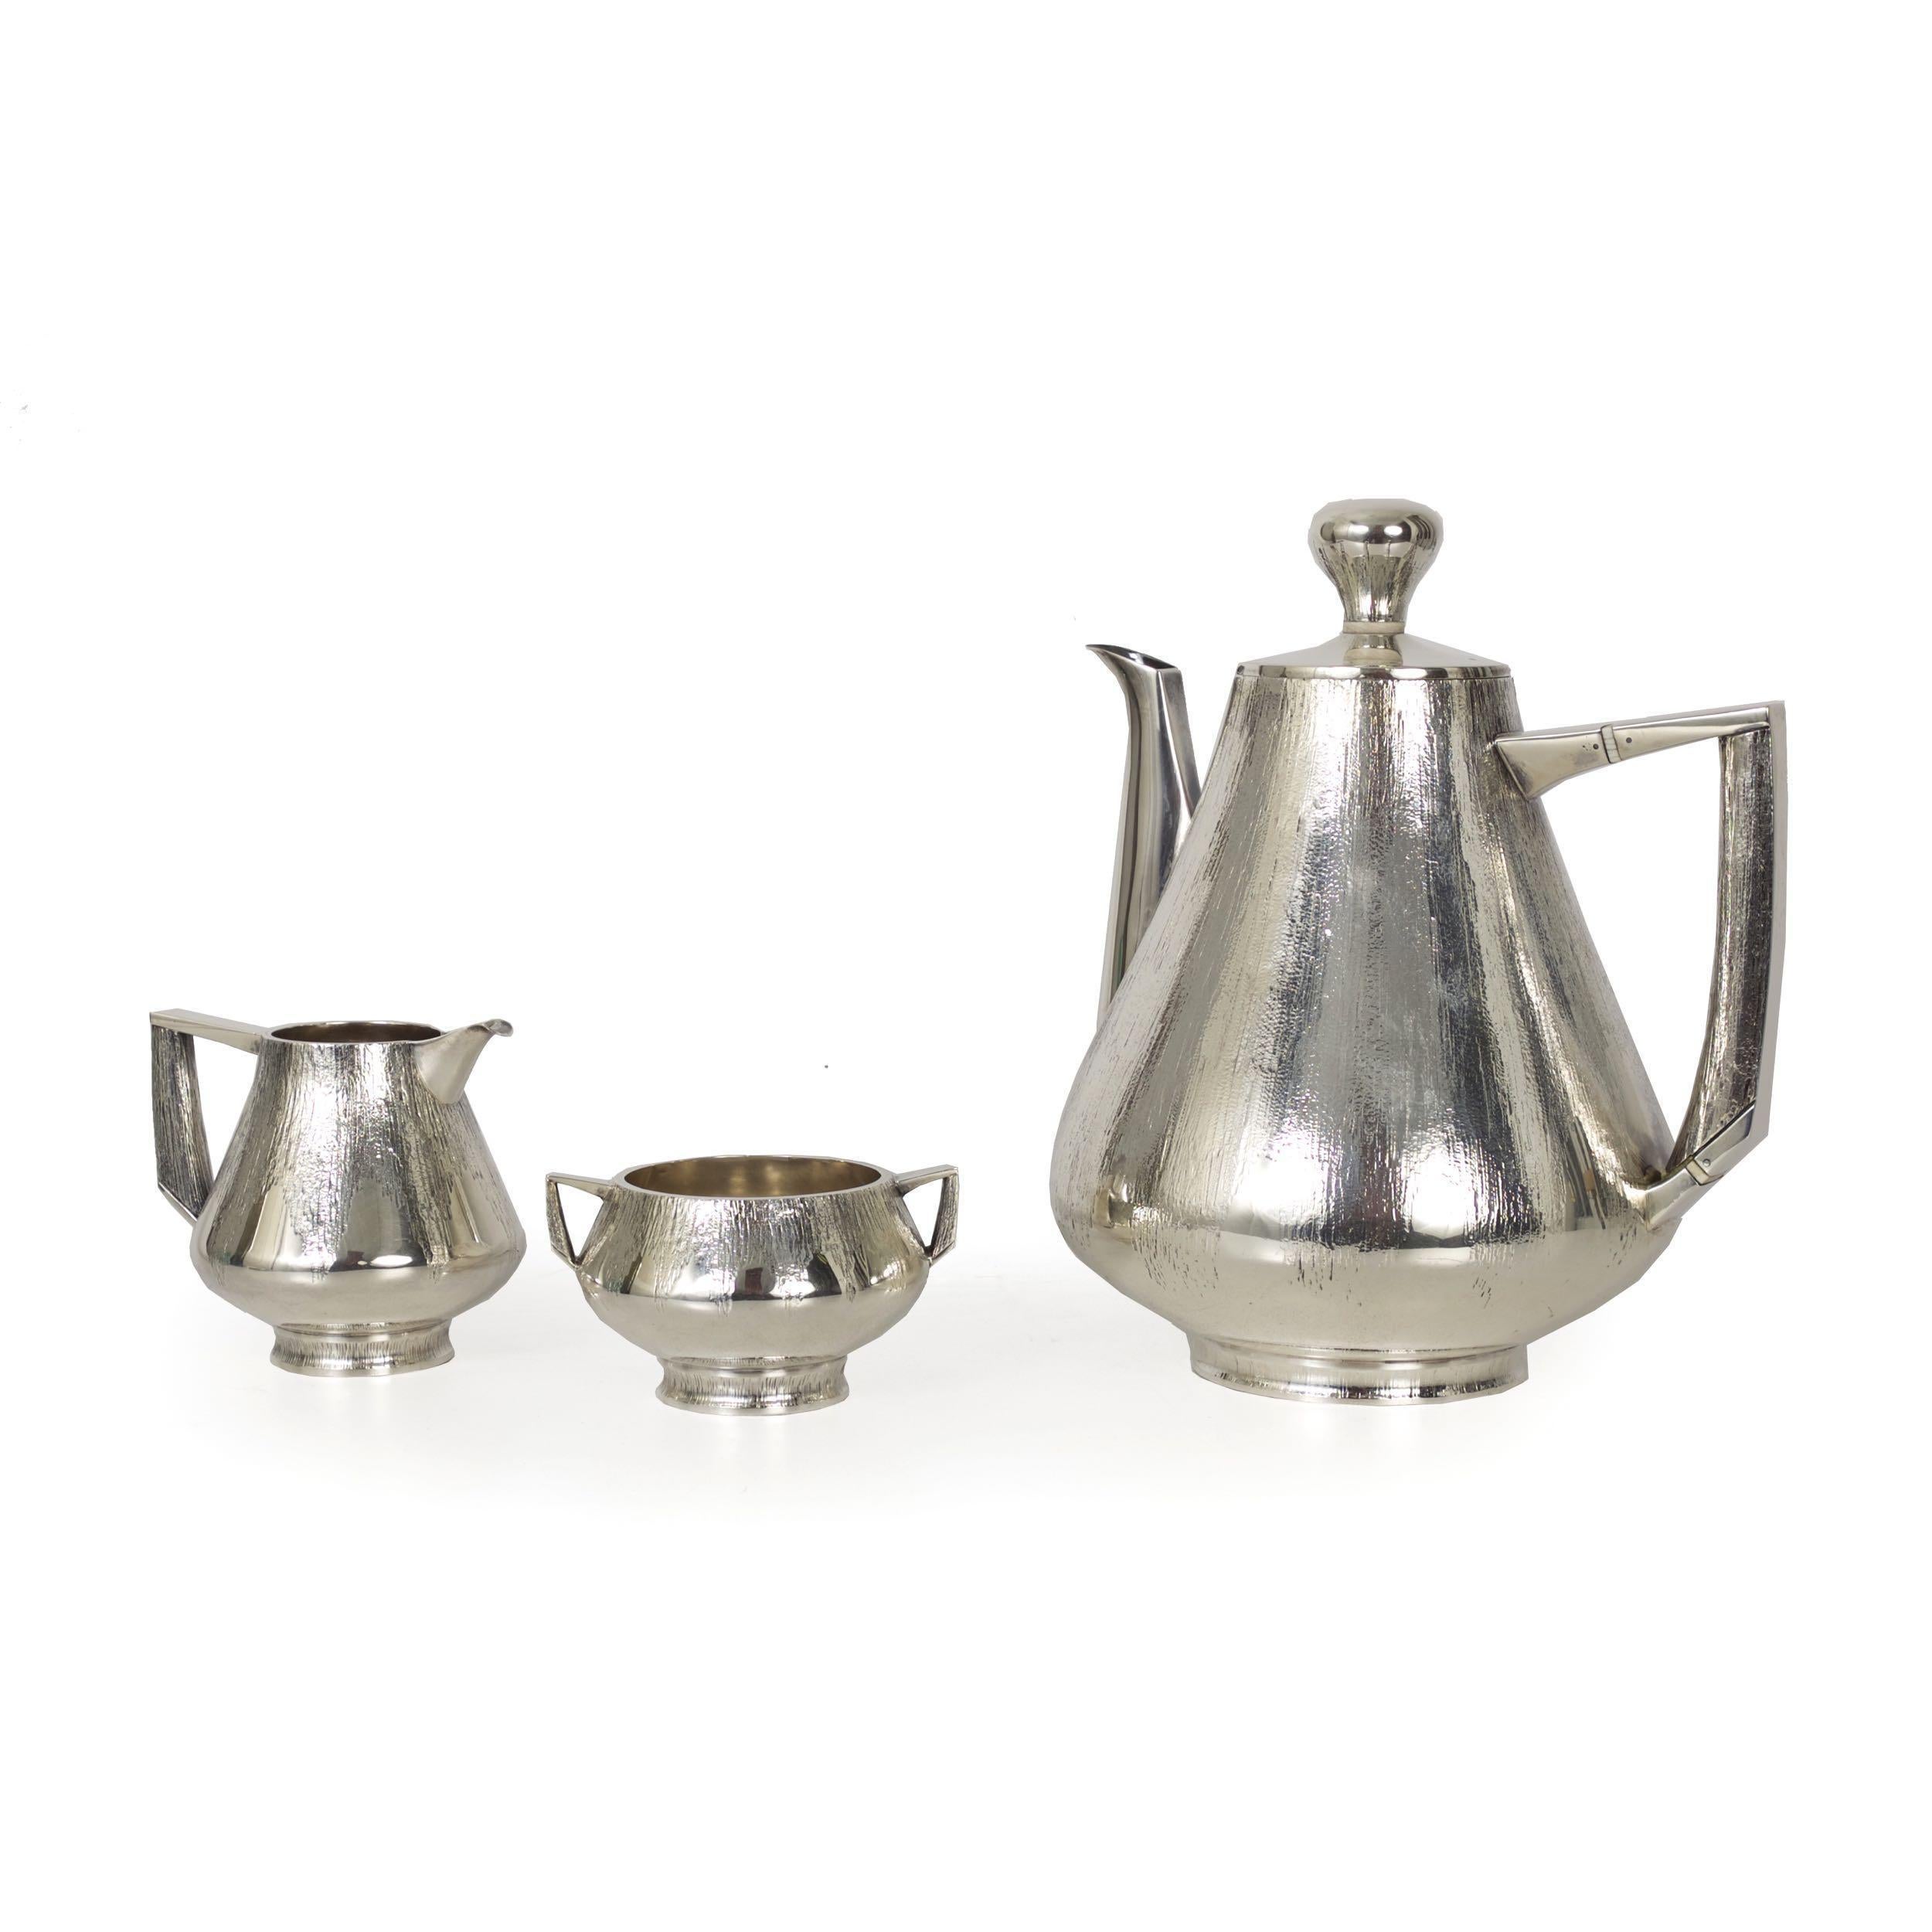 Modernist Sterling Silver 3-Piece Tea or Coffee Service by Peter Lunn, London In Good Condition For Sale In Shippensburg, PA